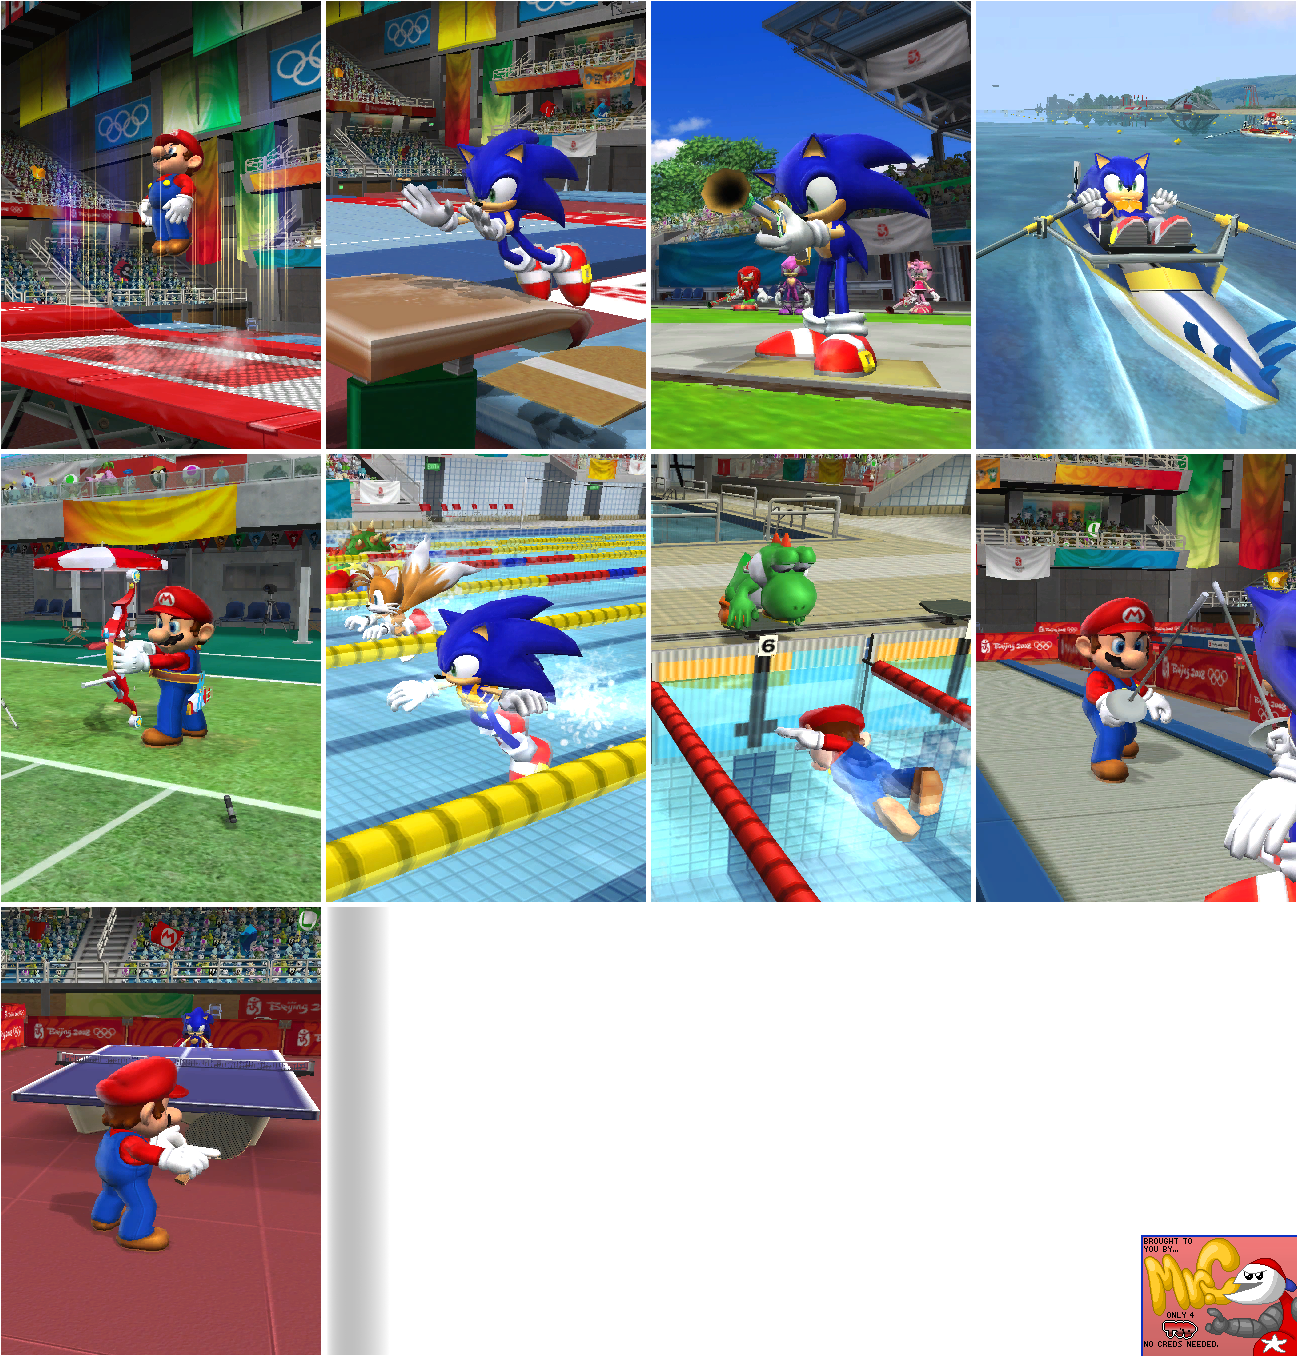 Mario & Sonic at the Olympic Games - Event Images (Other)